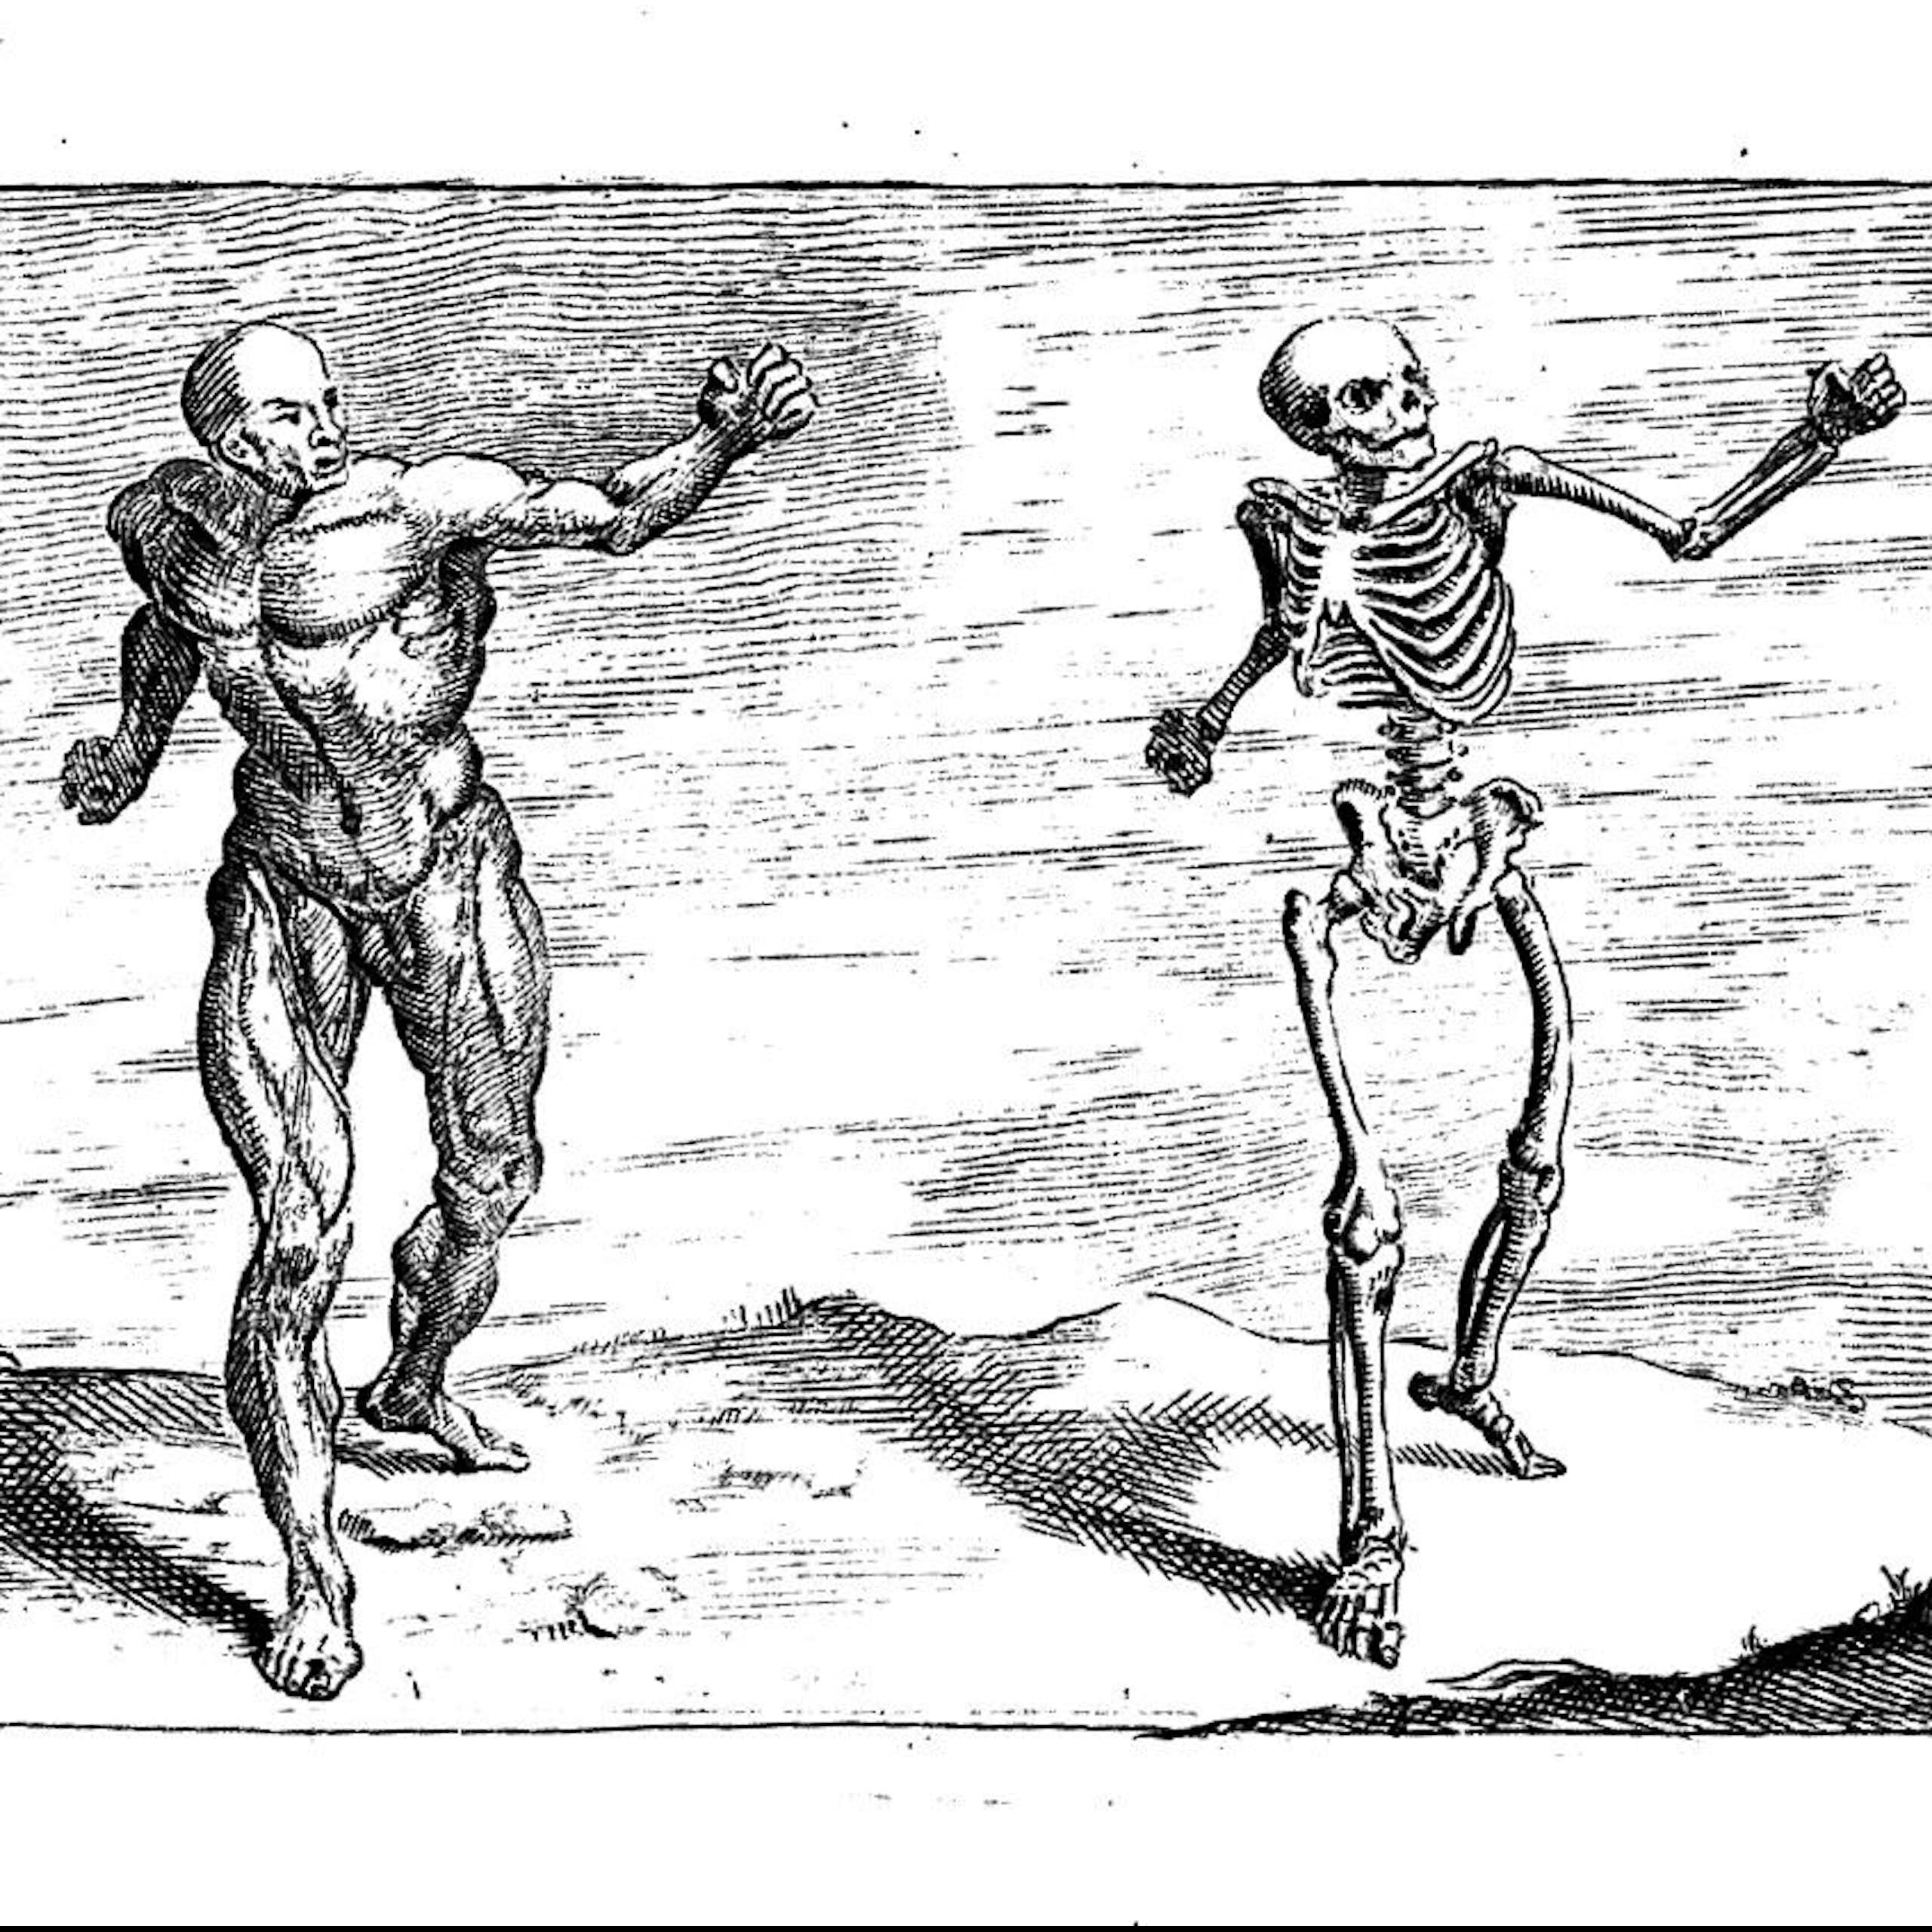 an illustration of a the musculature of a man in mid-pose, flanked by two skeletons